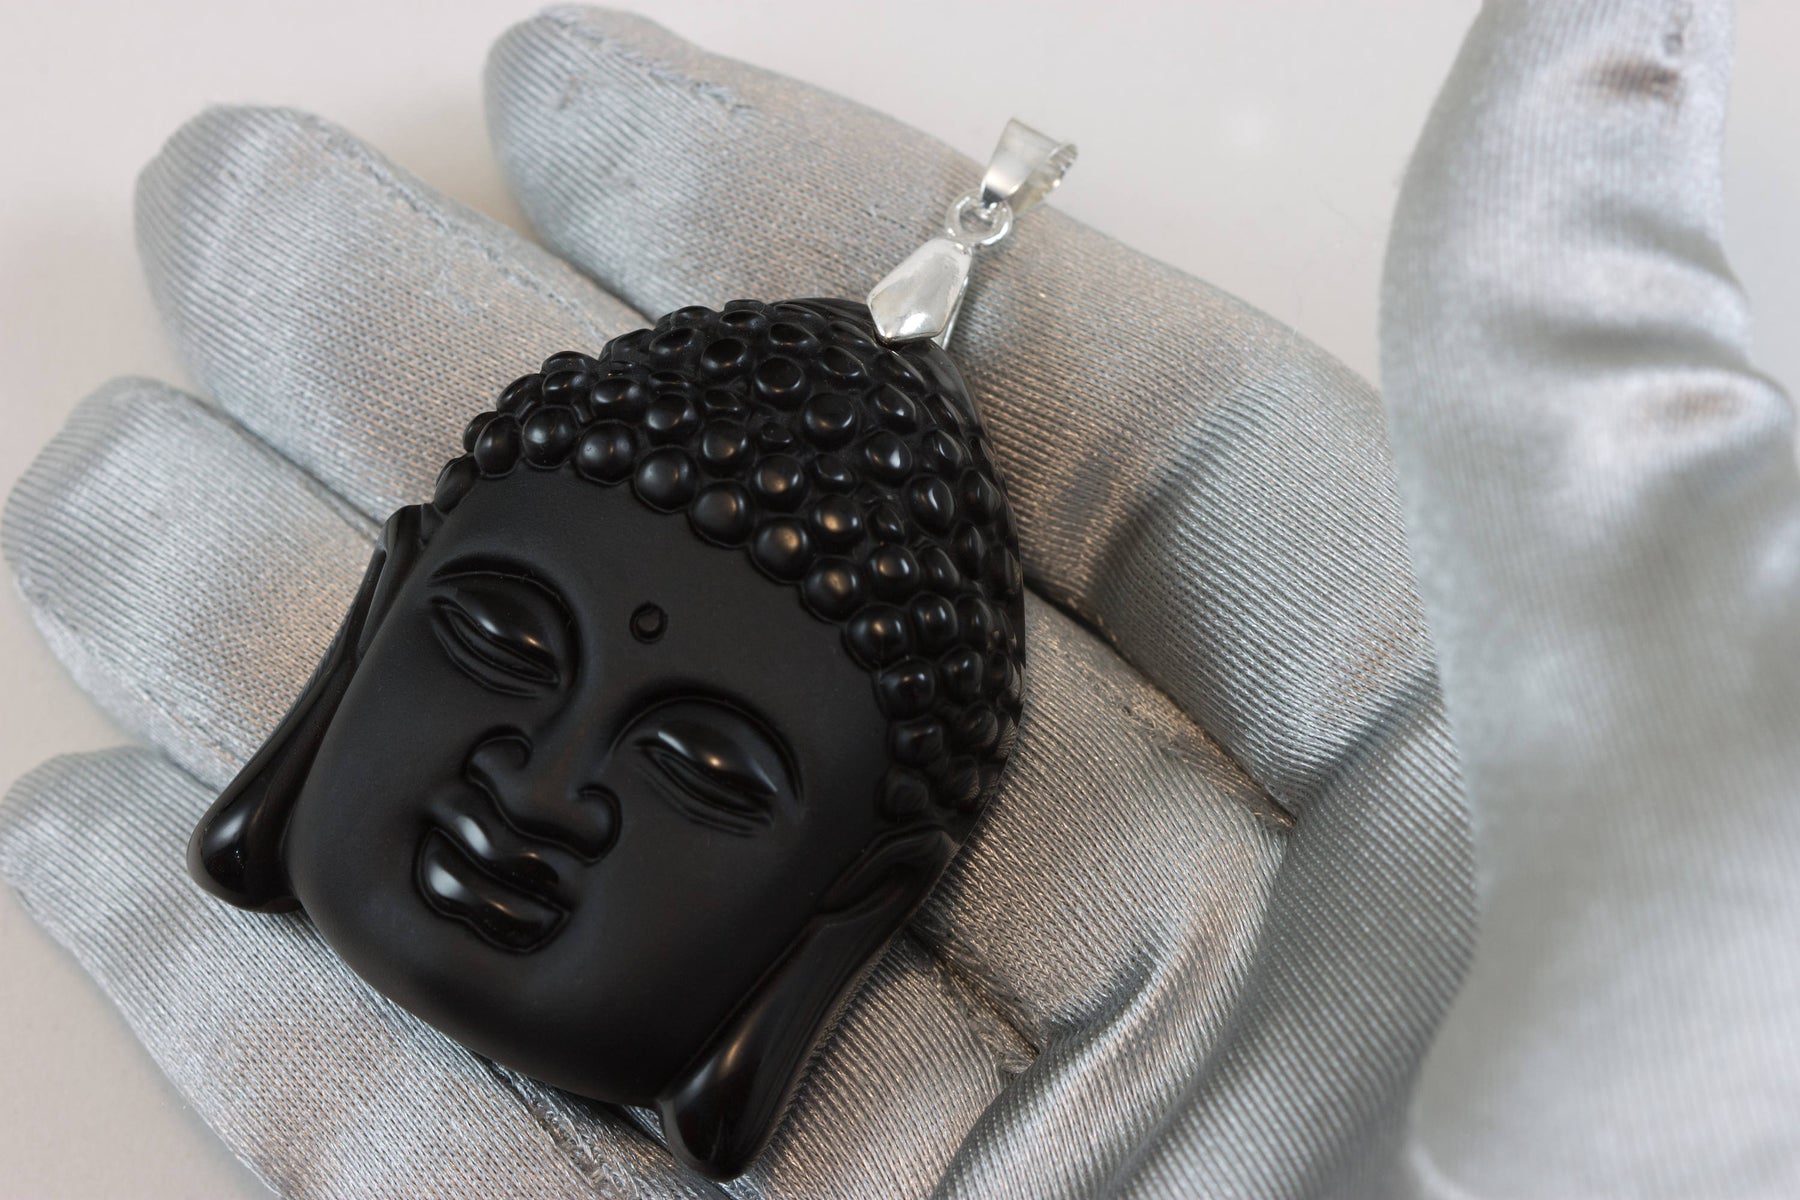 Real Black Jade Buddha Necklace, Lucky Smile Laughing Charm, Chinese  Vintage Grade A Jadeite Pendent, Protection Blessing Gift Men Women - Etsy